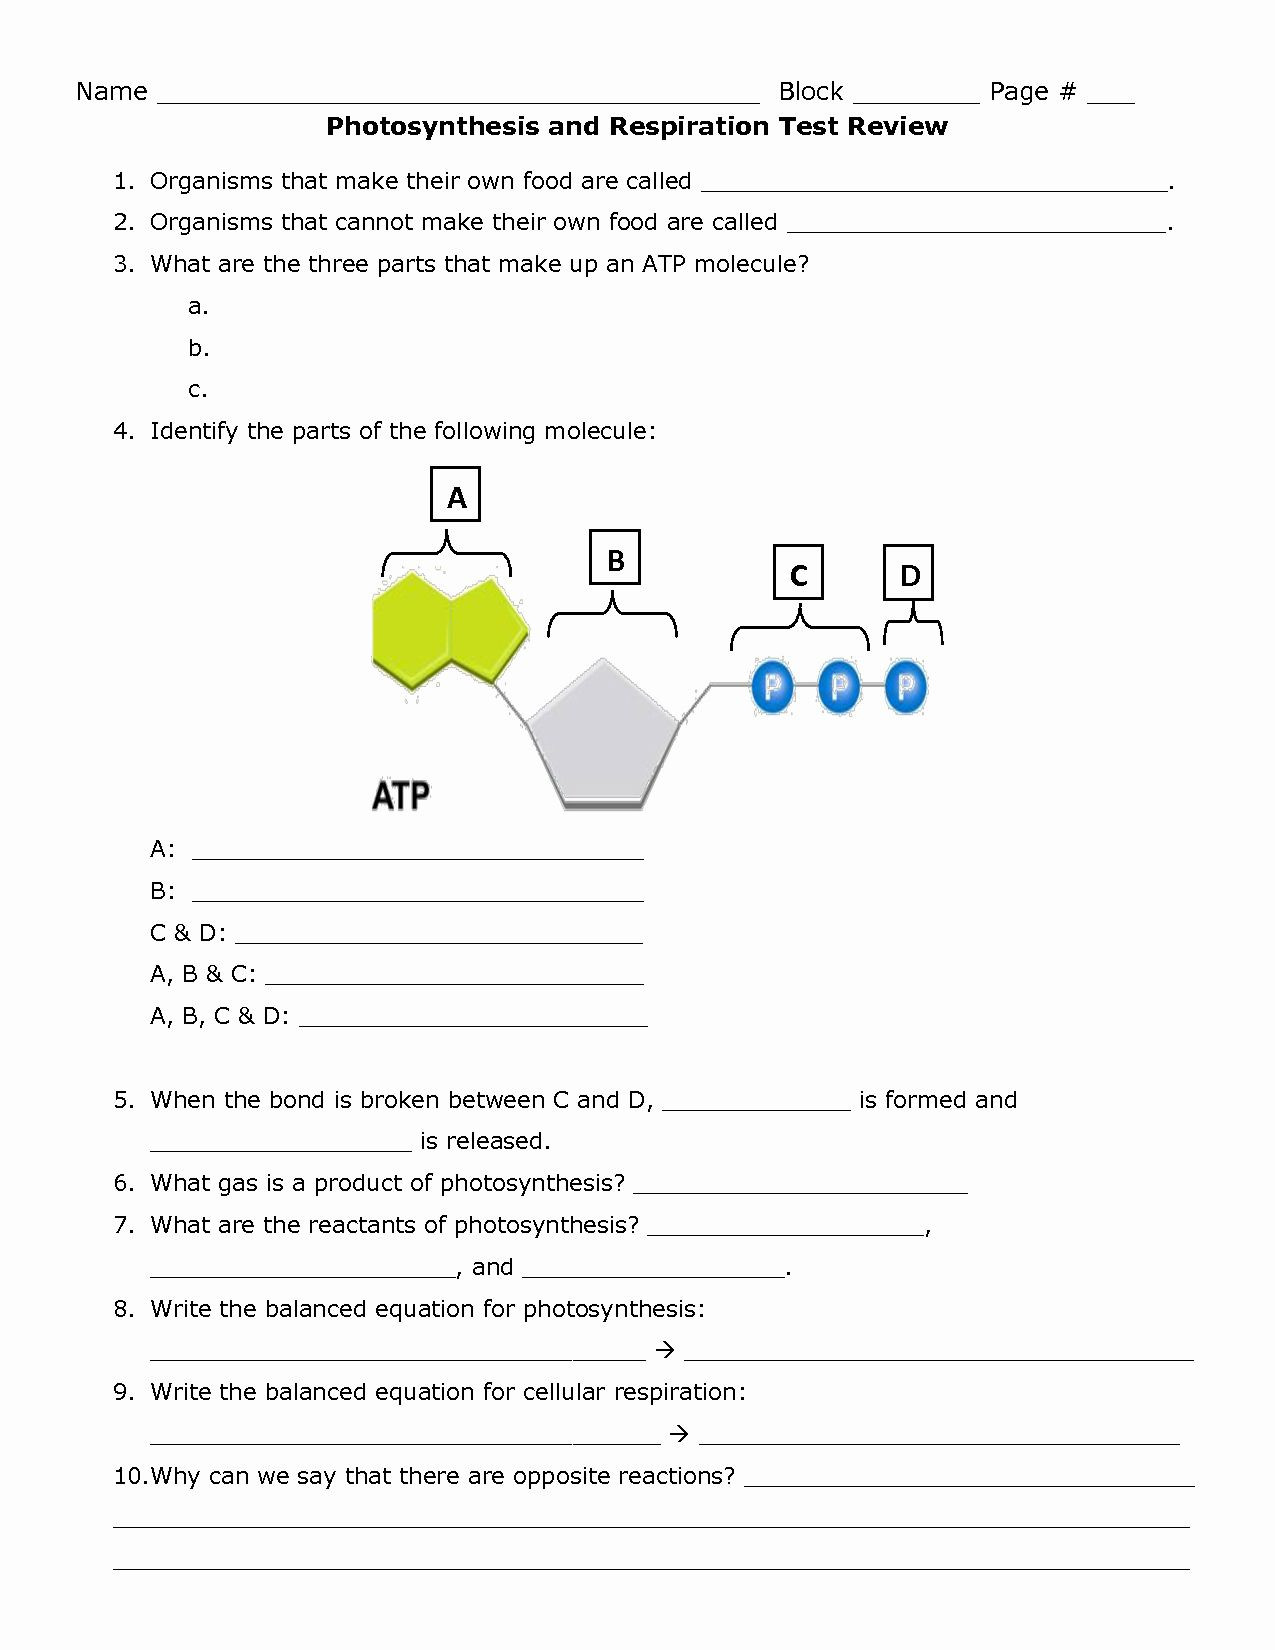 Photosynthesis and Respiration Worksheet 50 Synthesis Worksheet Answer Key In 2020